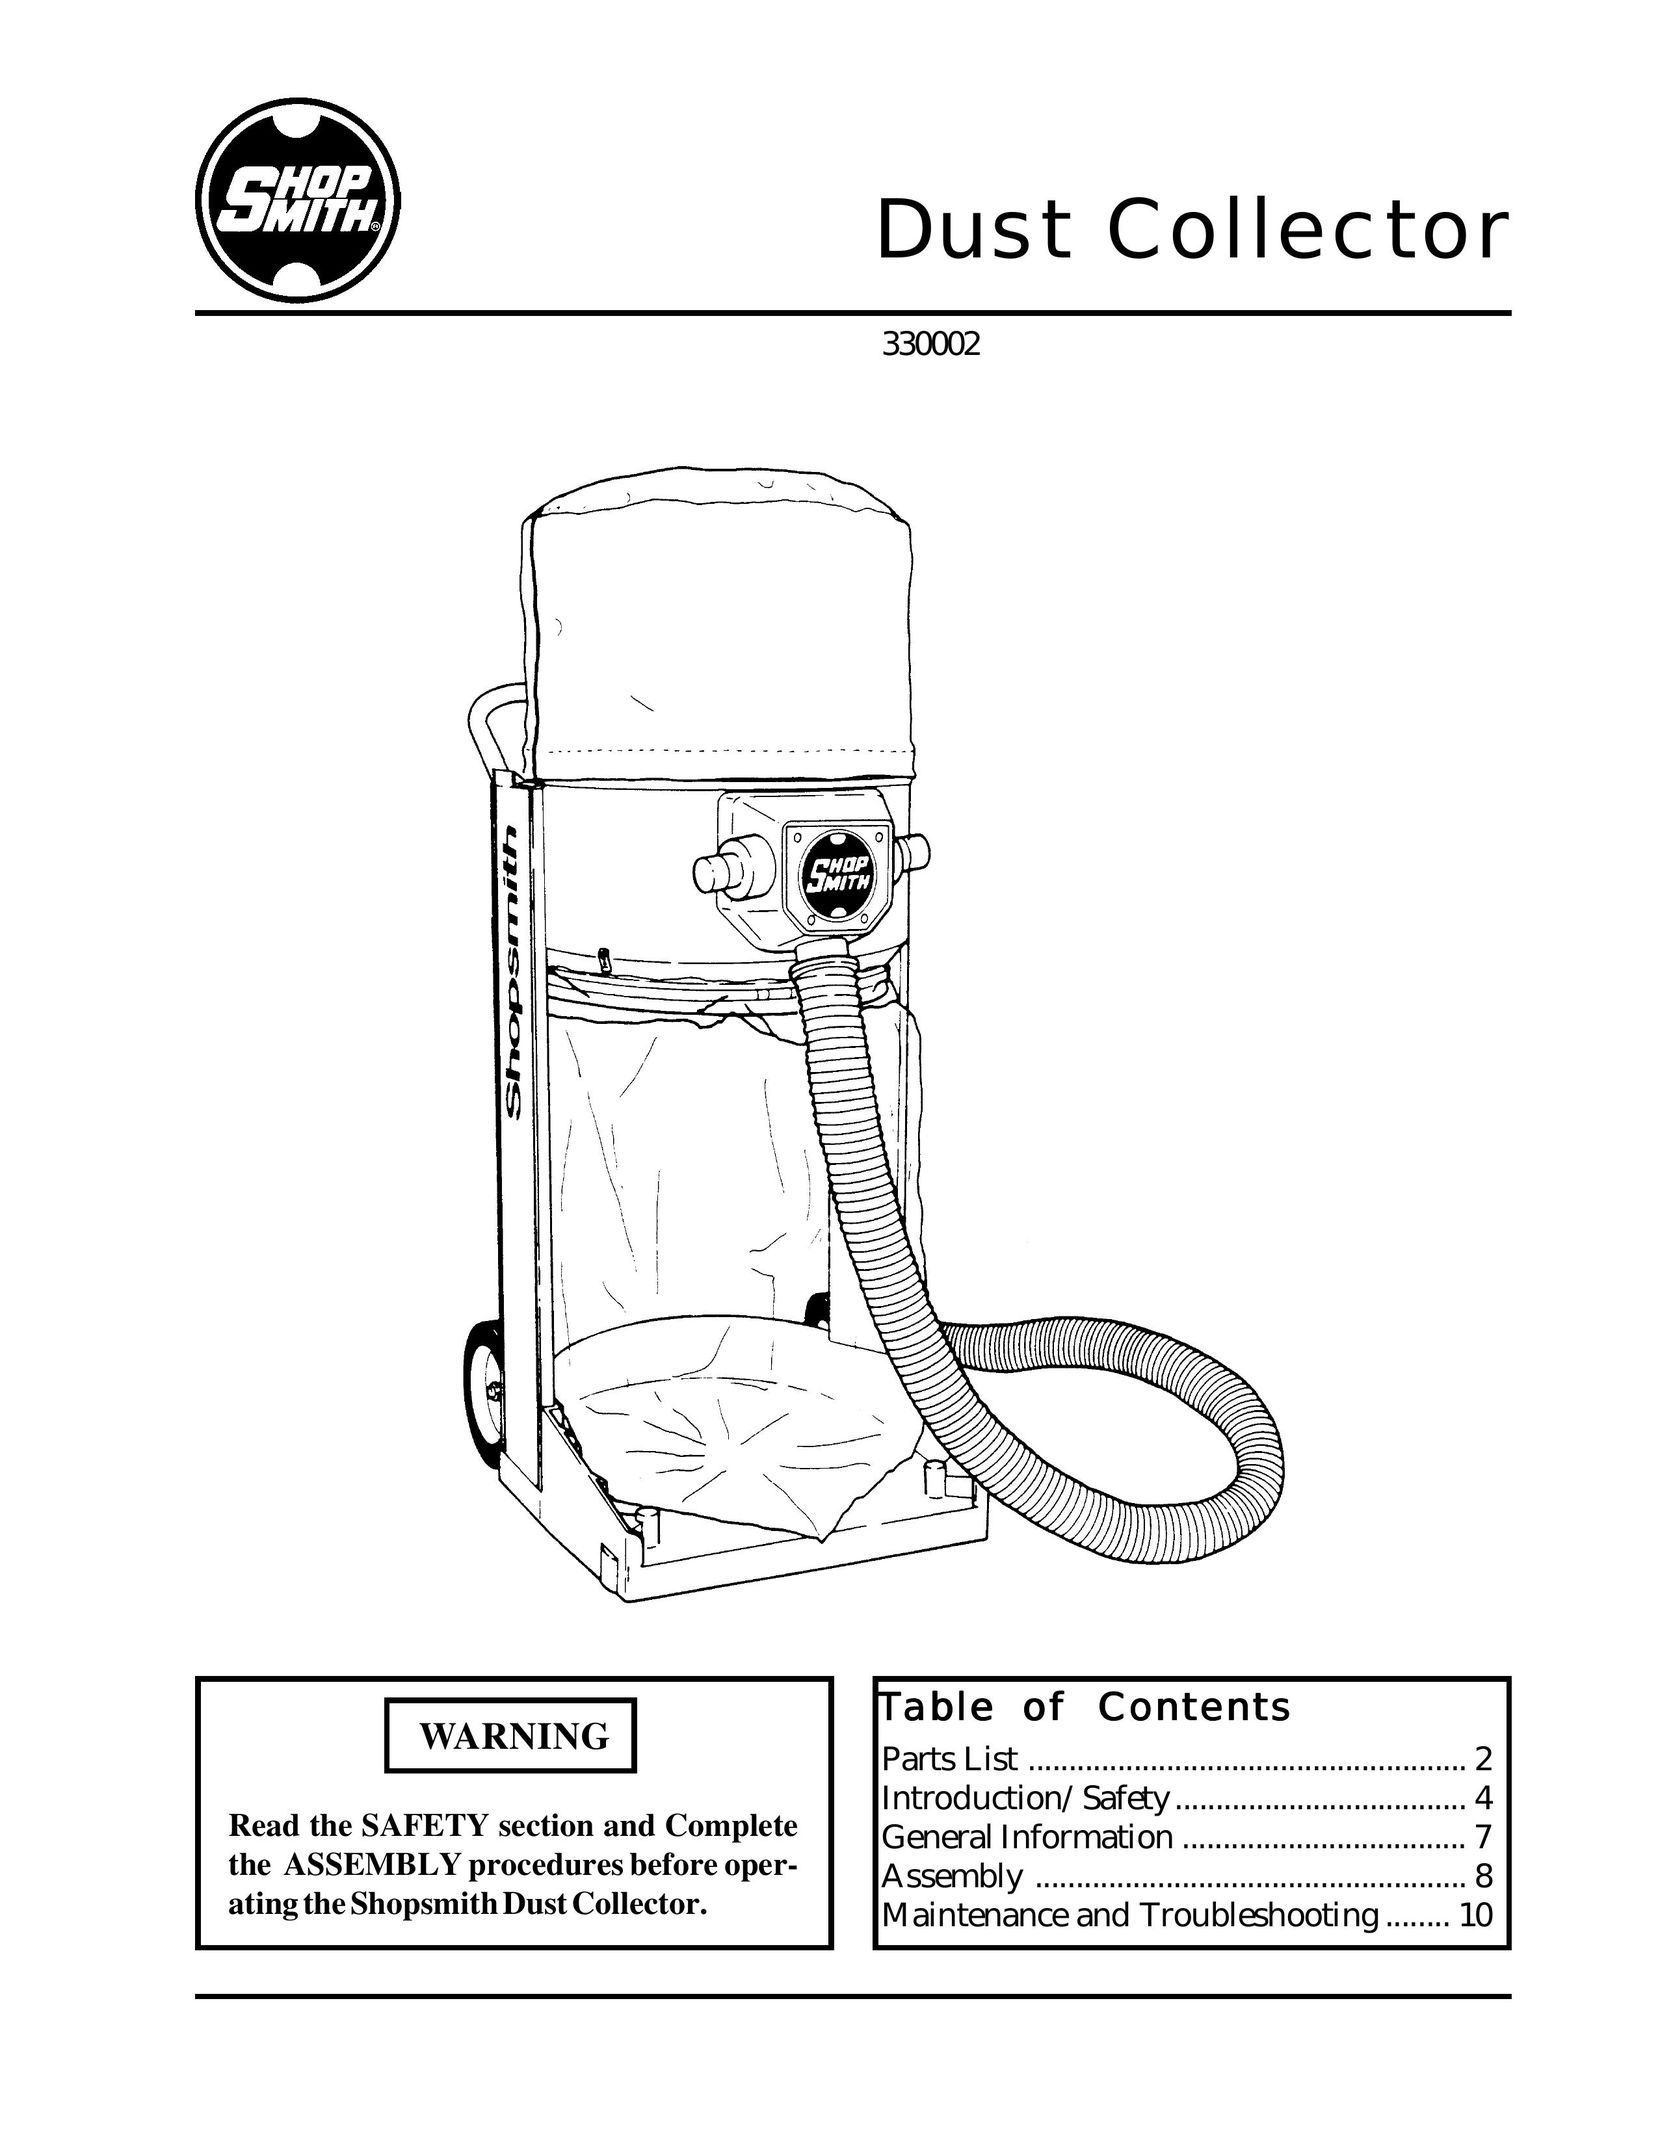 Shopsmith DustCollector Dust Collector User Manual